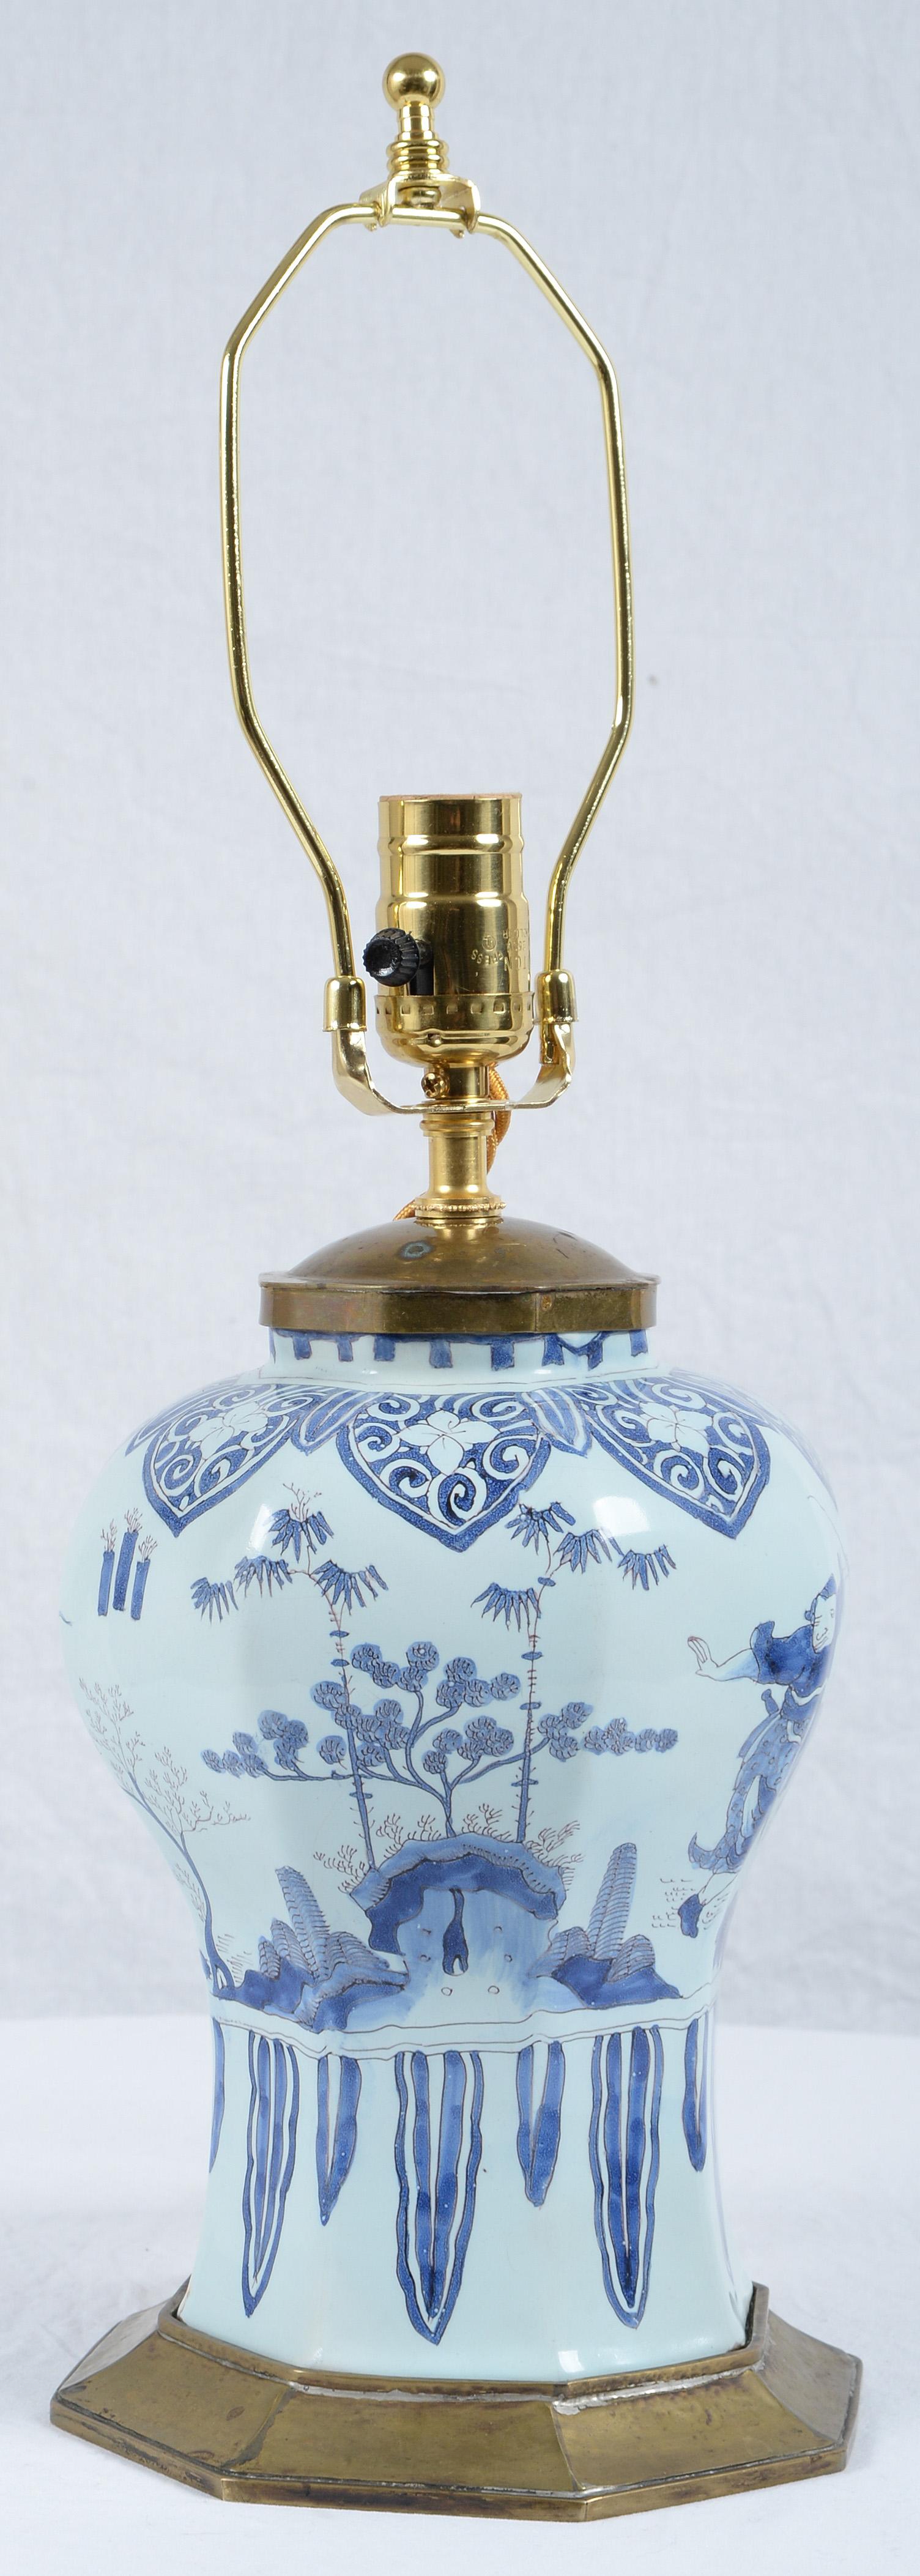 17th Century Delft Blue and White Chinoiserie Faience Vase Mounted as a Lamp For Sale